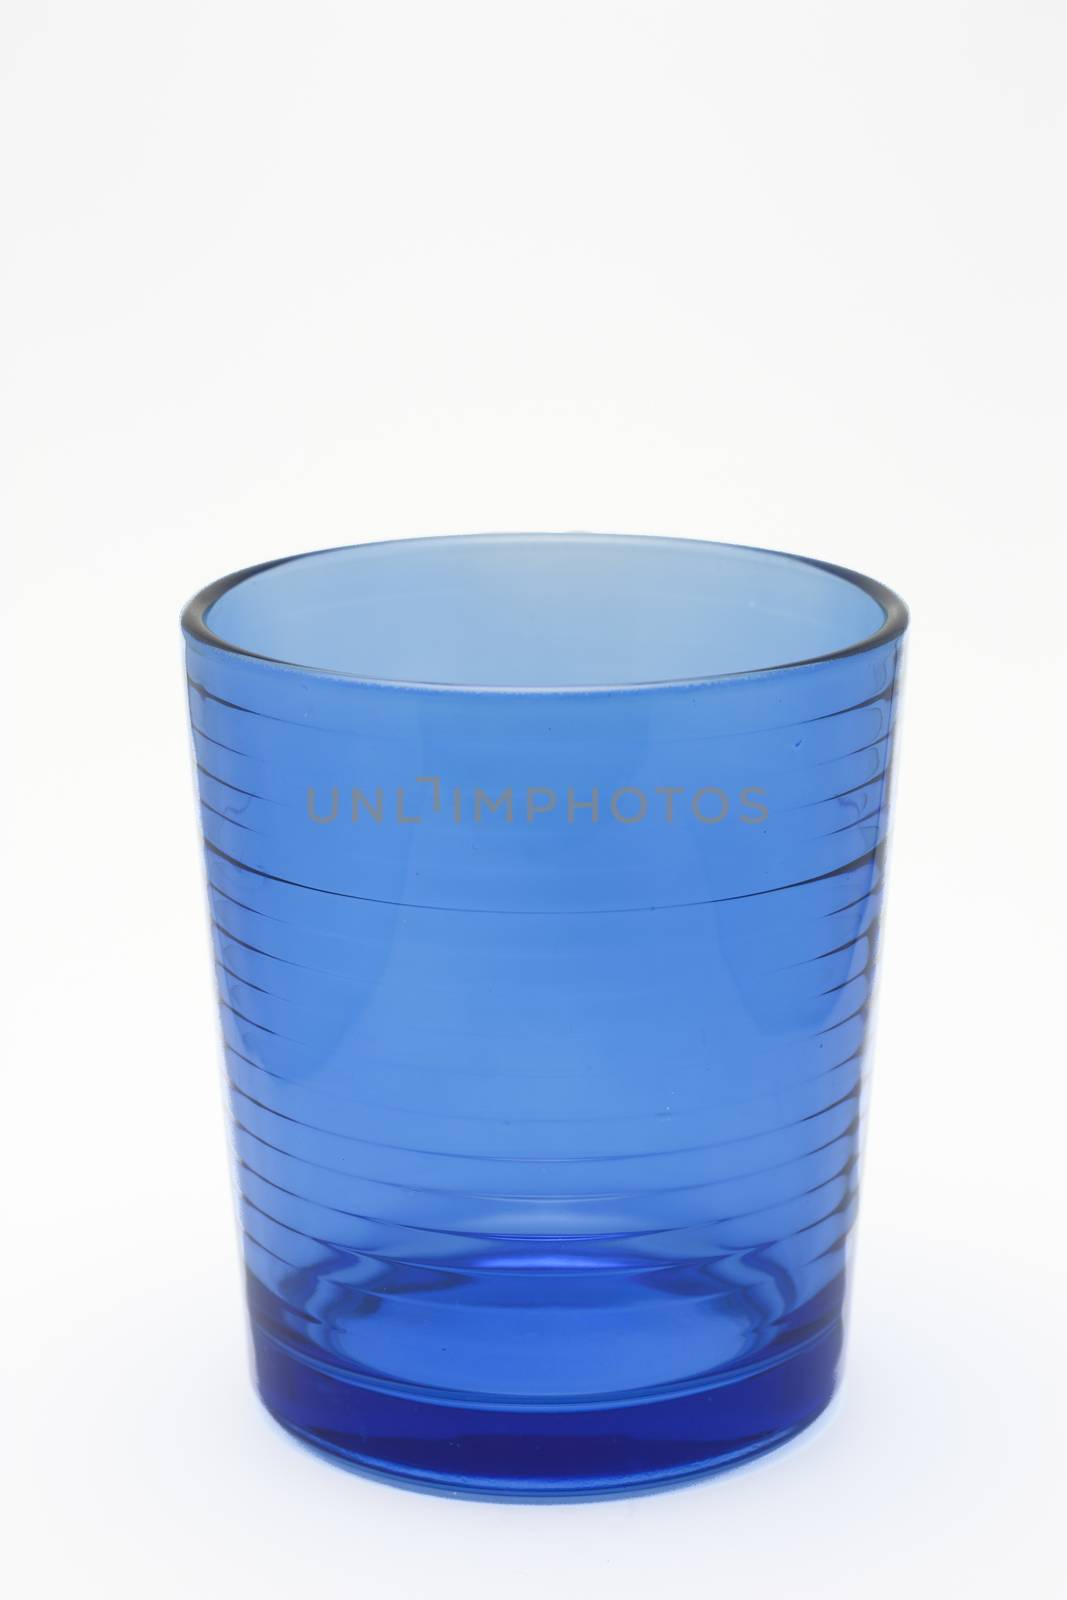 Blue glass isolated on white background